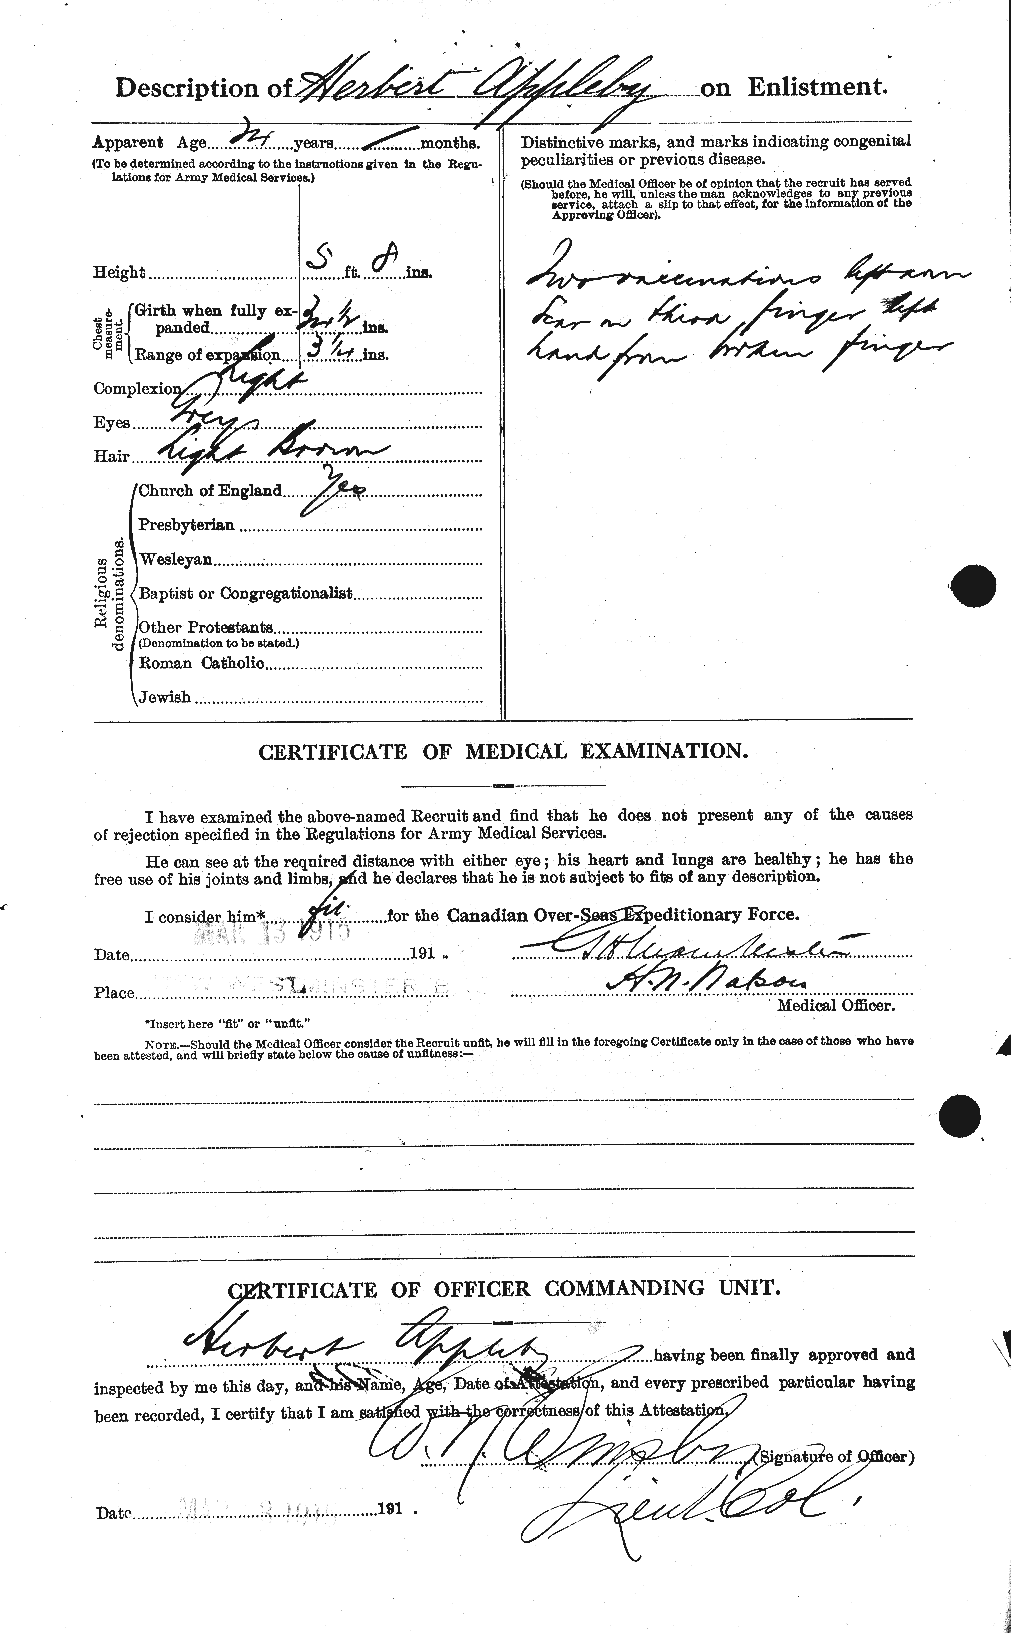 Personnel Records of the First World War - CEF 211372b